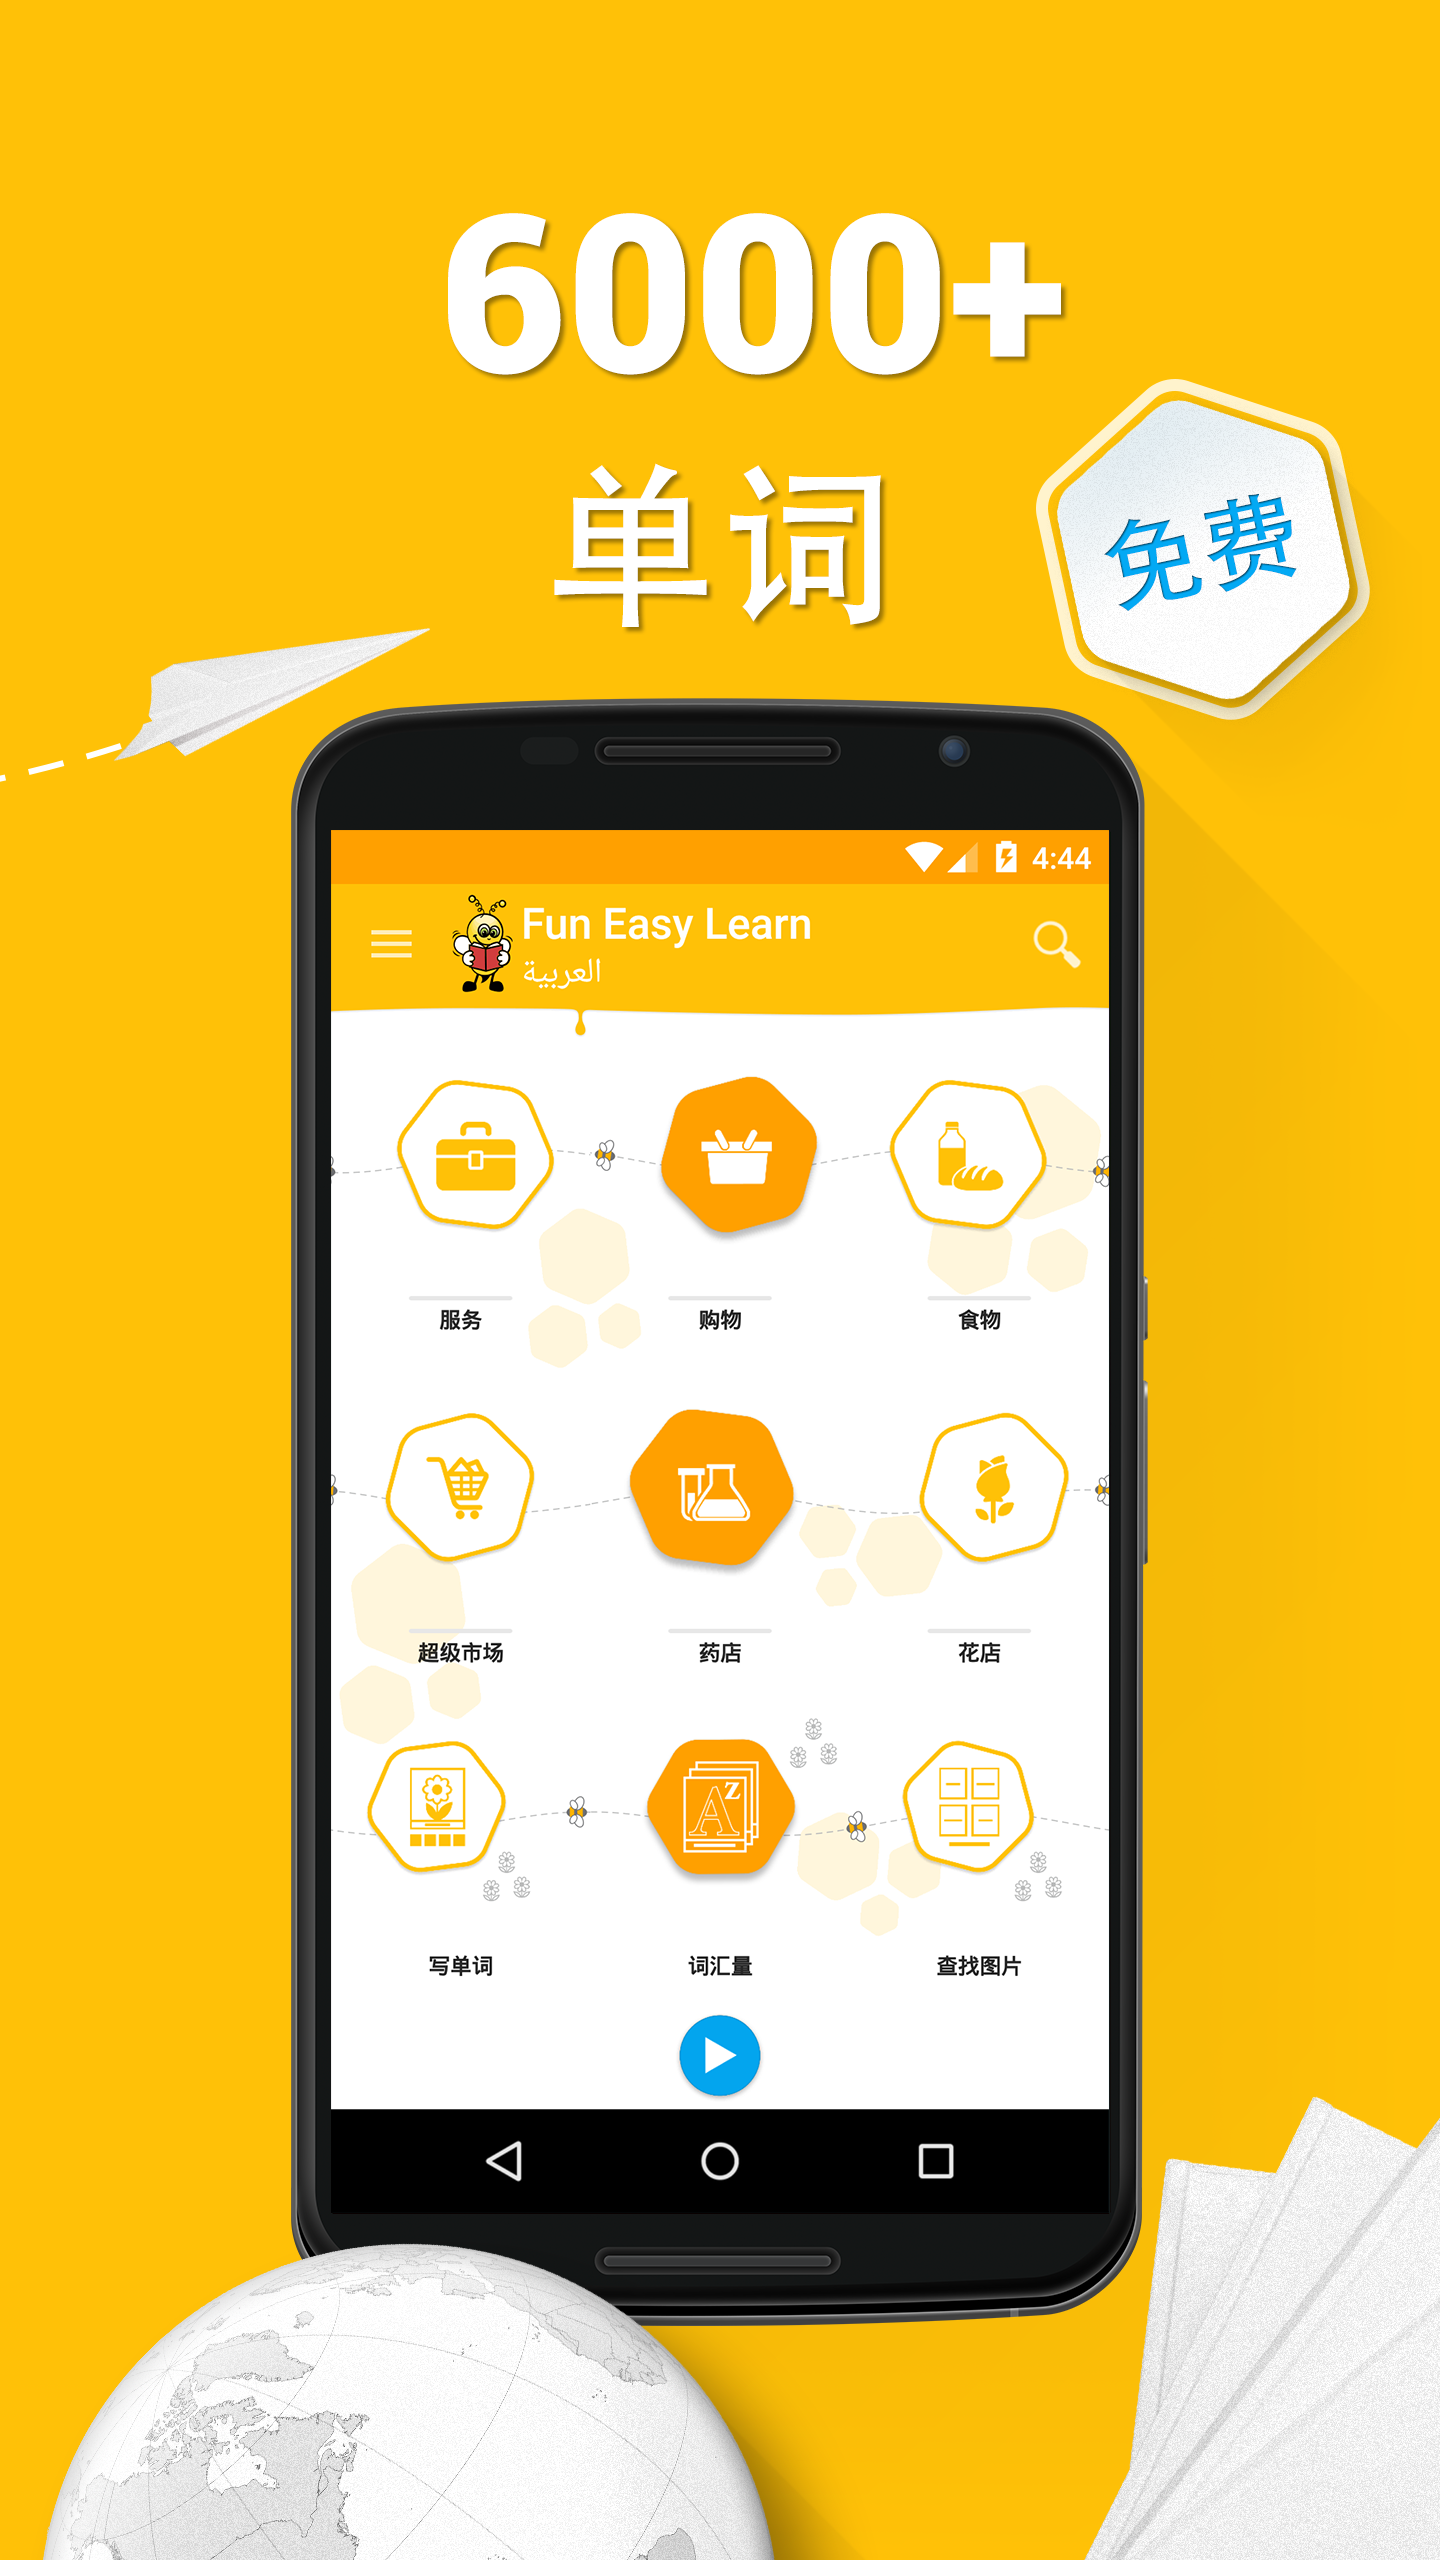 Android application Learn Arabic - 15,000 Words screenshort